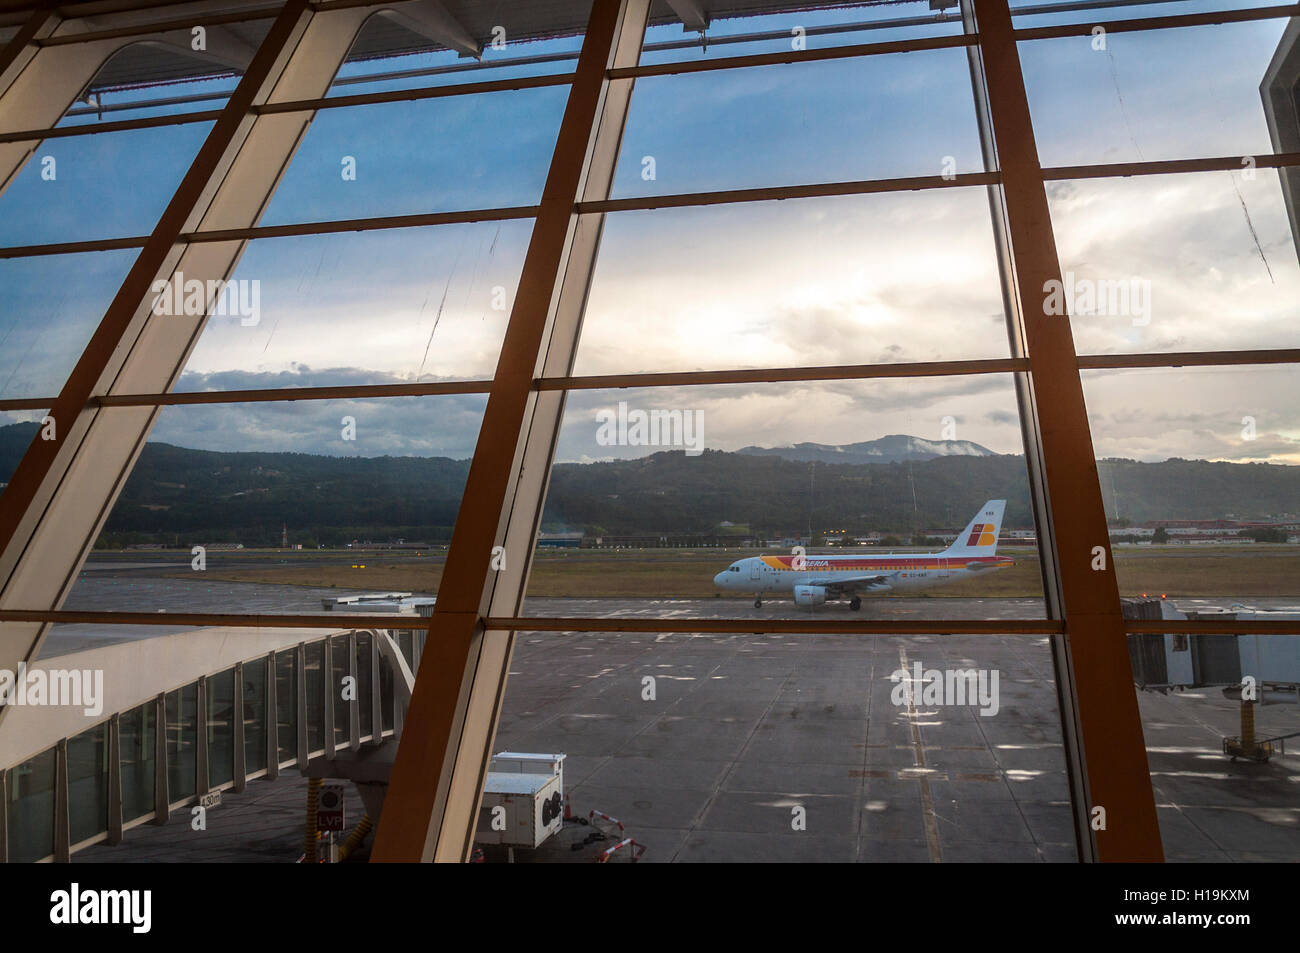 Iberia aircraft taxis at Bilbao Airport, Spain. Sot through window of terminal building Stock Photo